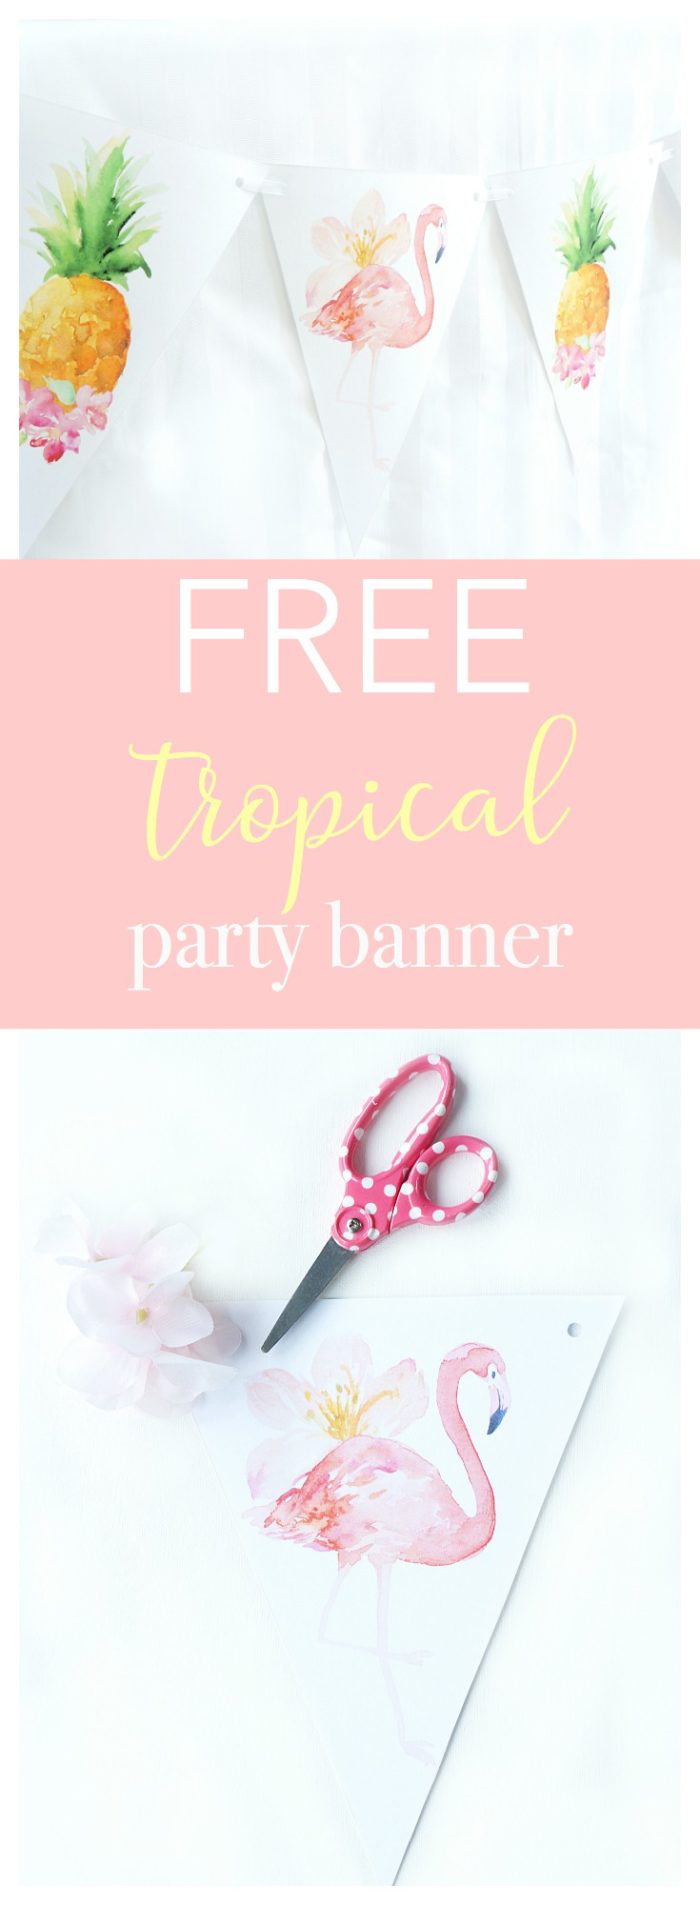 Collage with text: Free tropical party banner